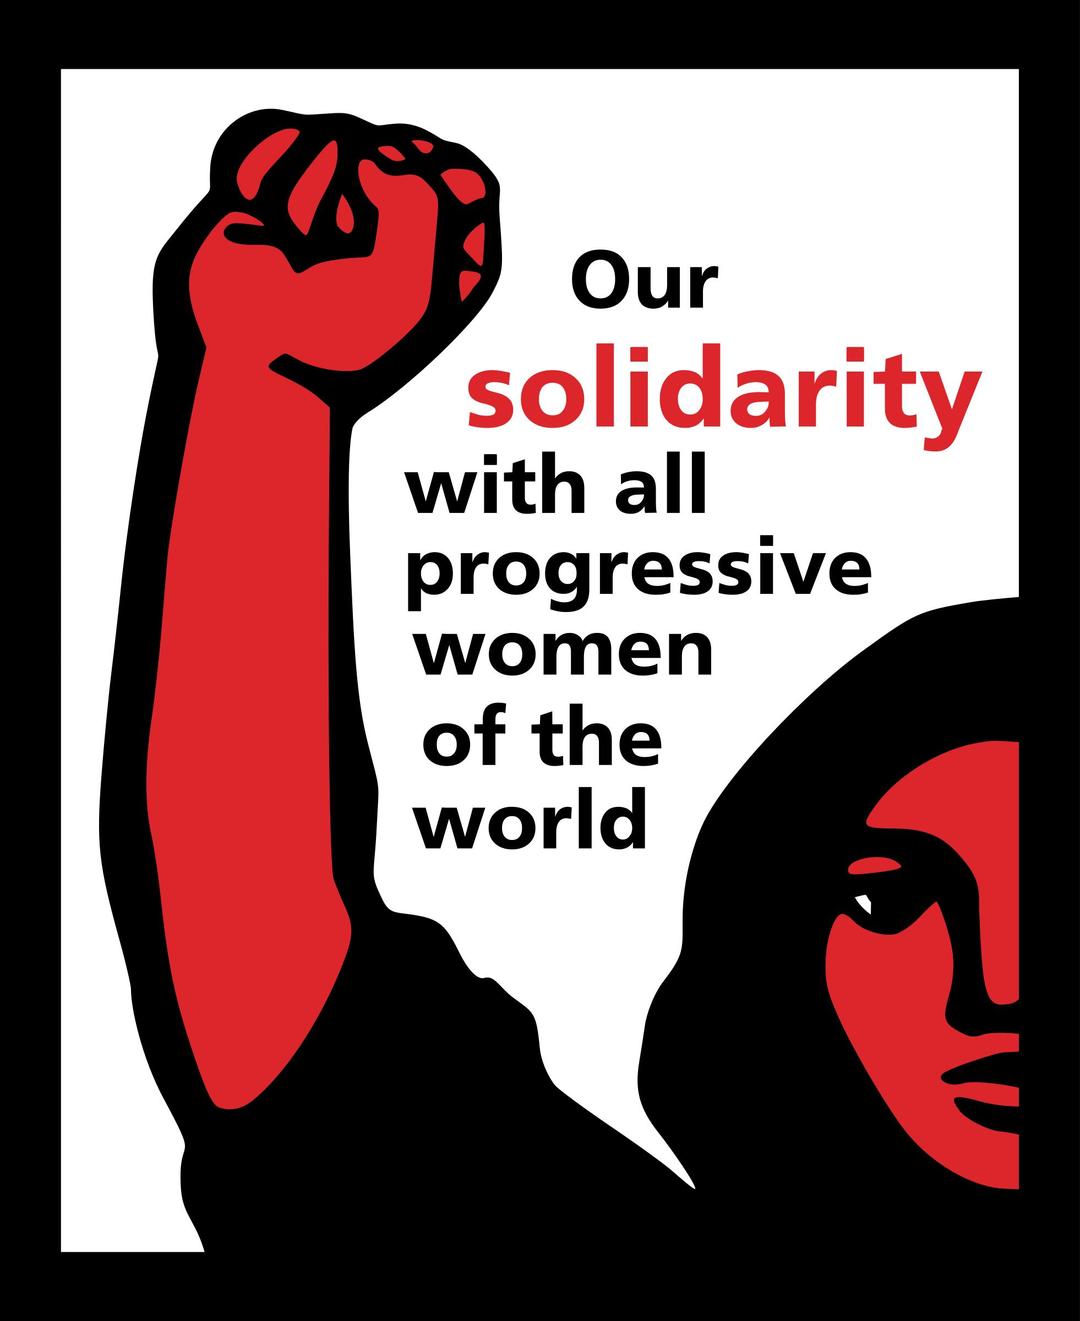 Our solidarity with all progressive women of the world png transparent